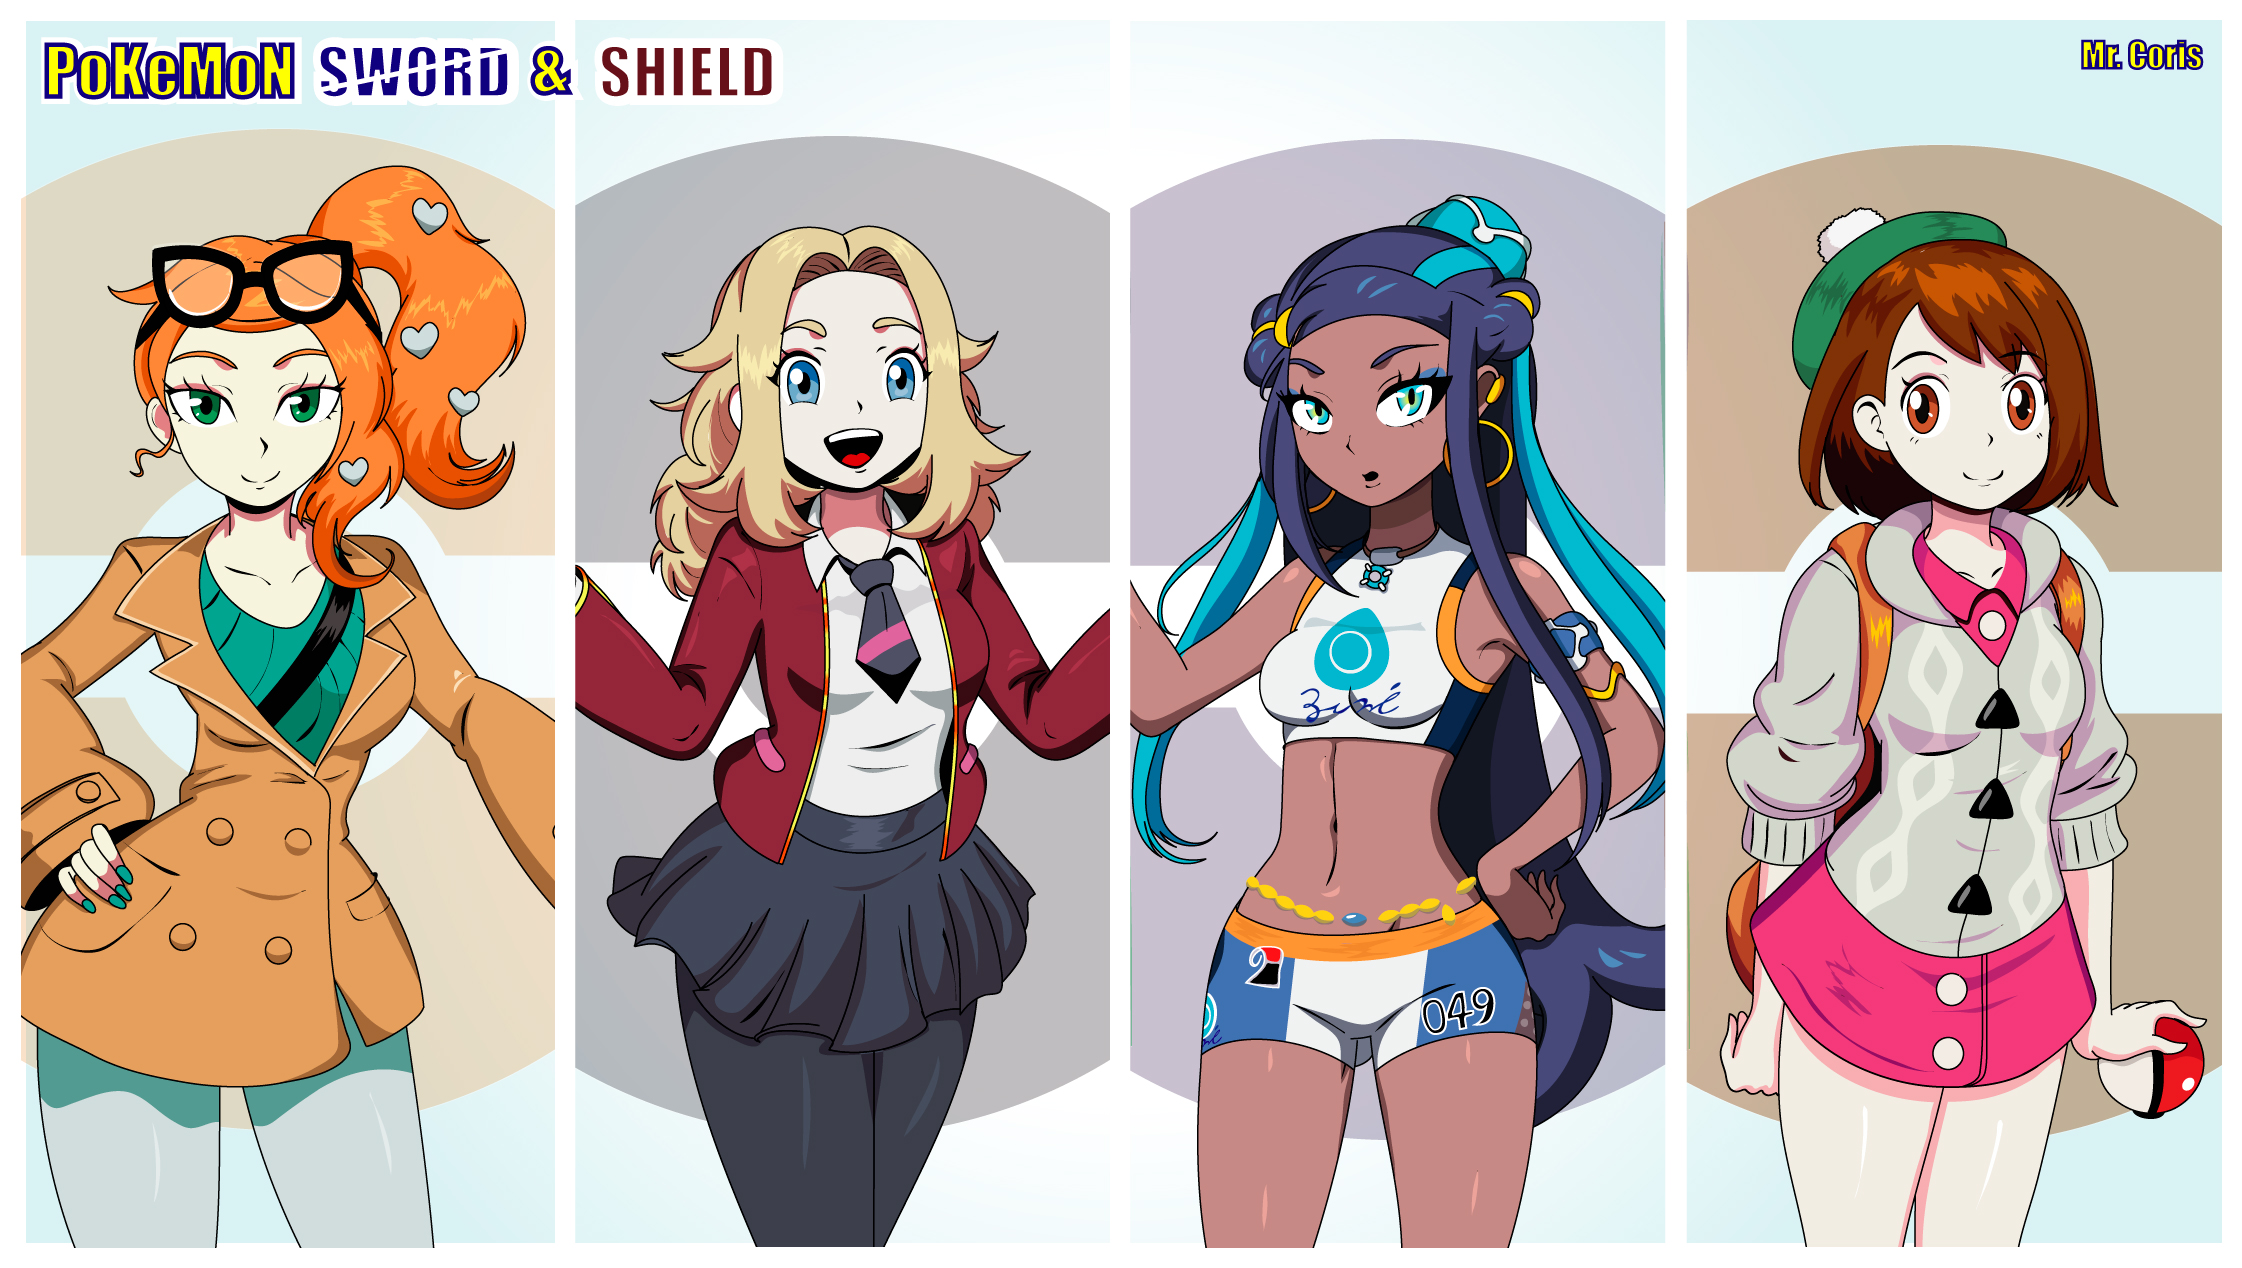 Pokemon Images Pokemon Sword And Shield Characters Female